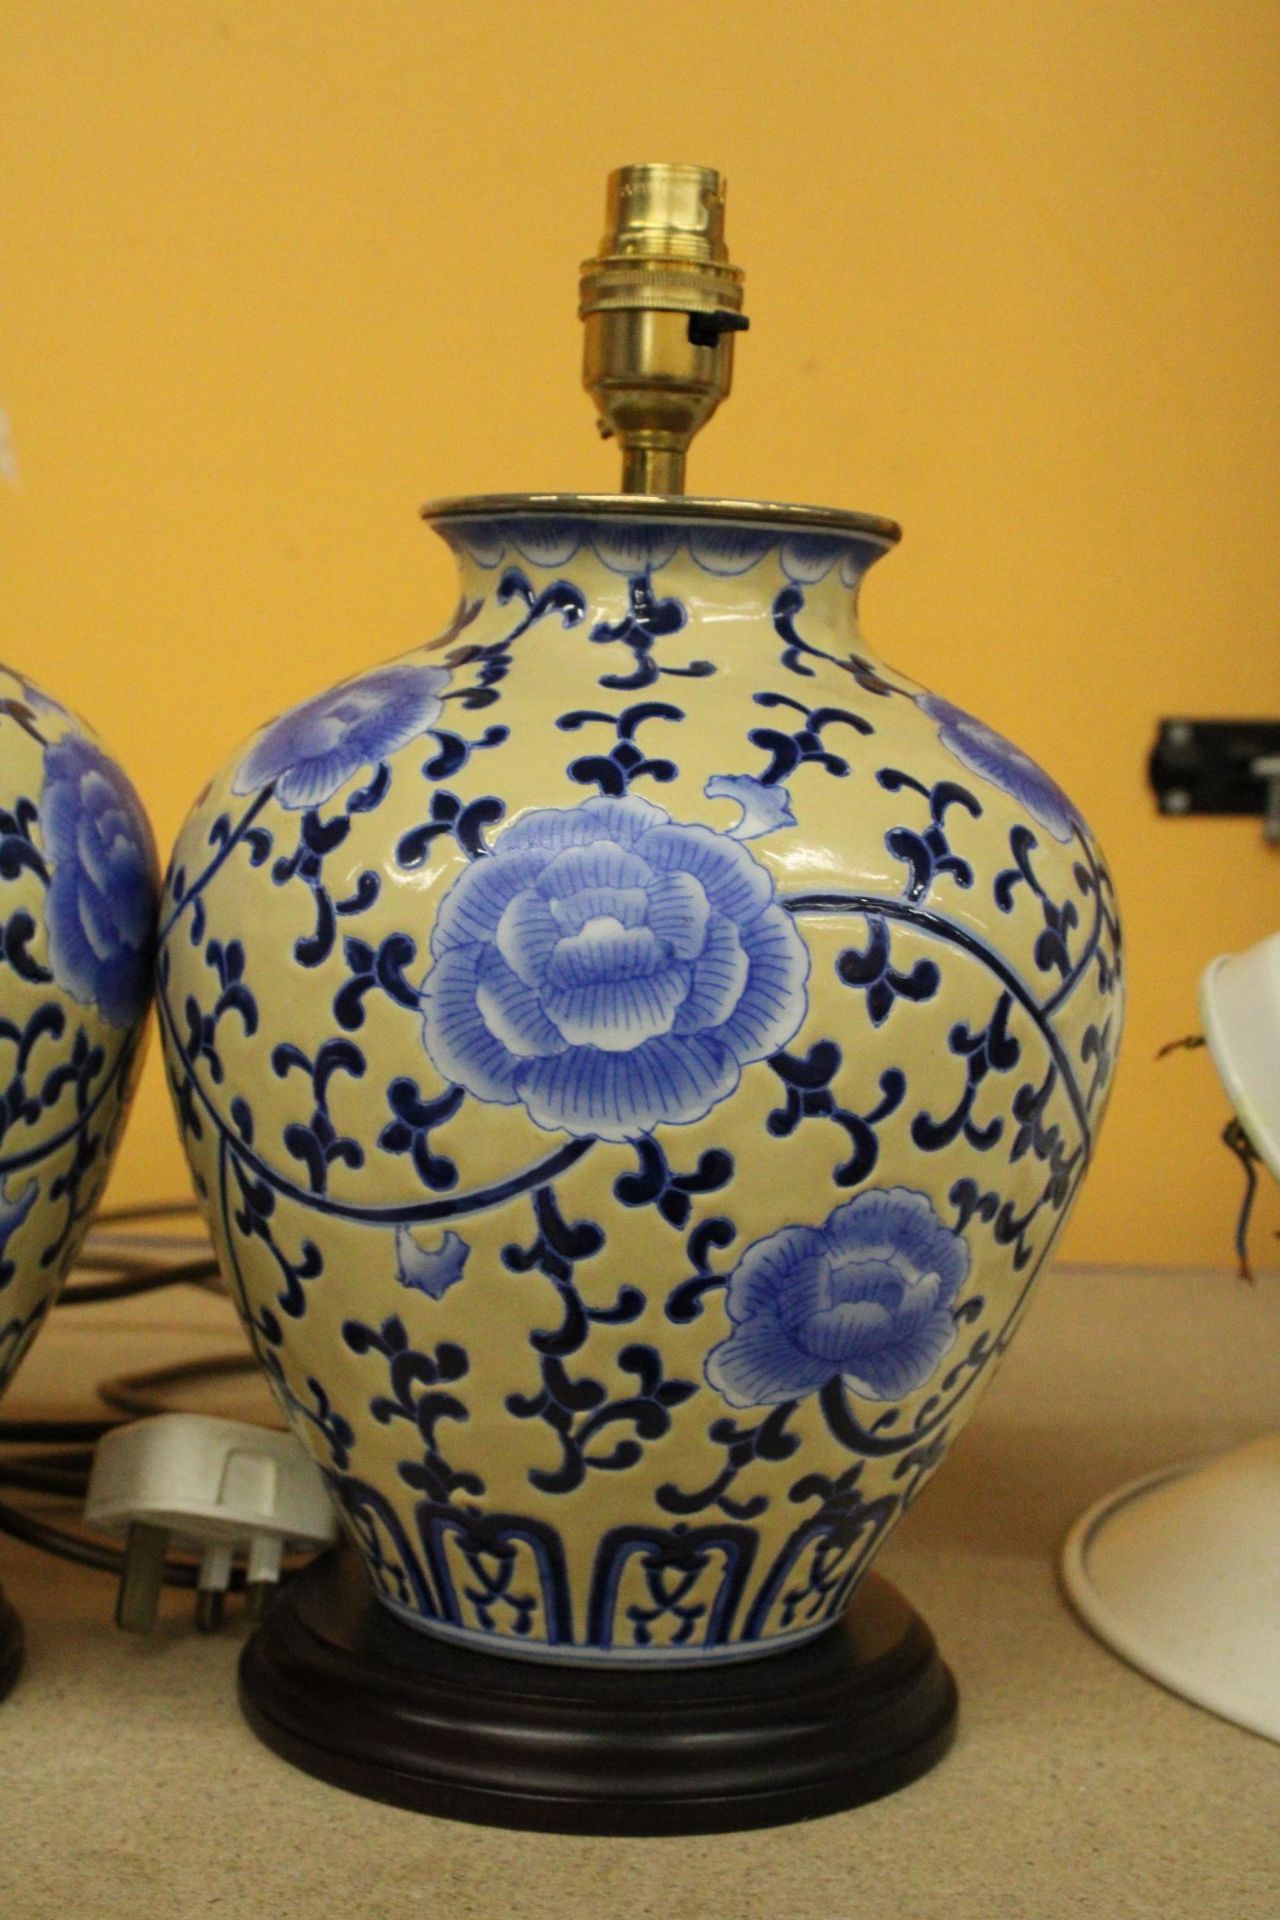 A PAIR OF ORIENTAL STYLE TABLE LAMPS - Image 2 of 4